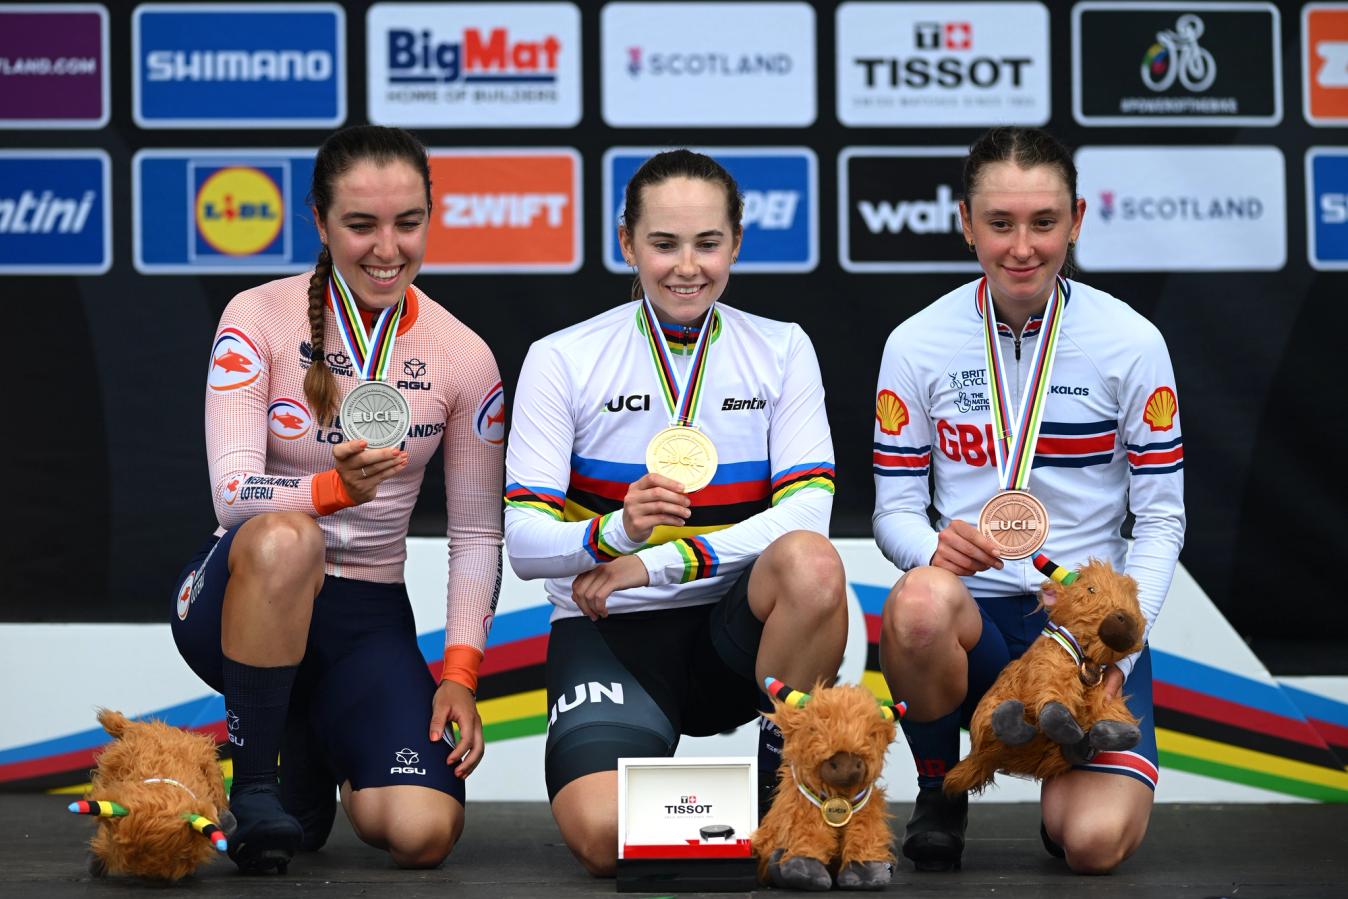 Shackley (right) finished third in the under-23 road race at last year's UCI World Championships in Glasgow